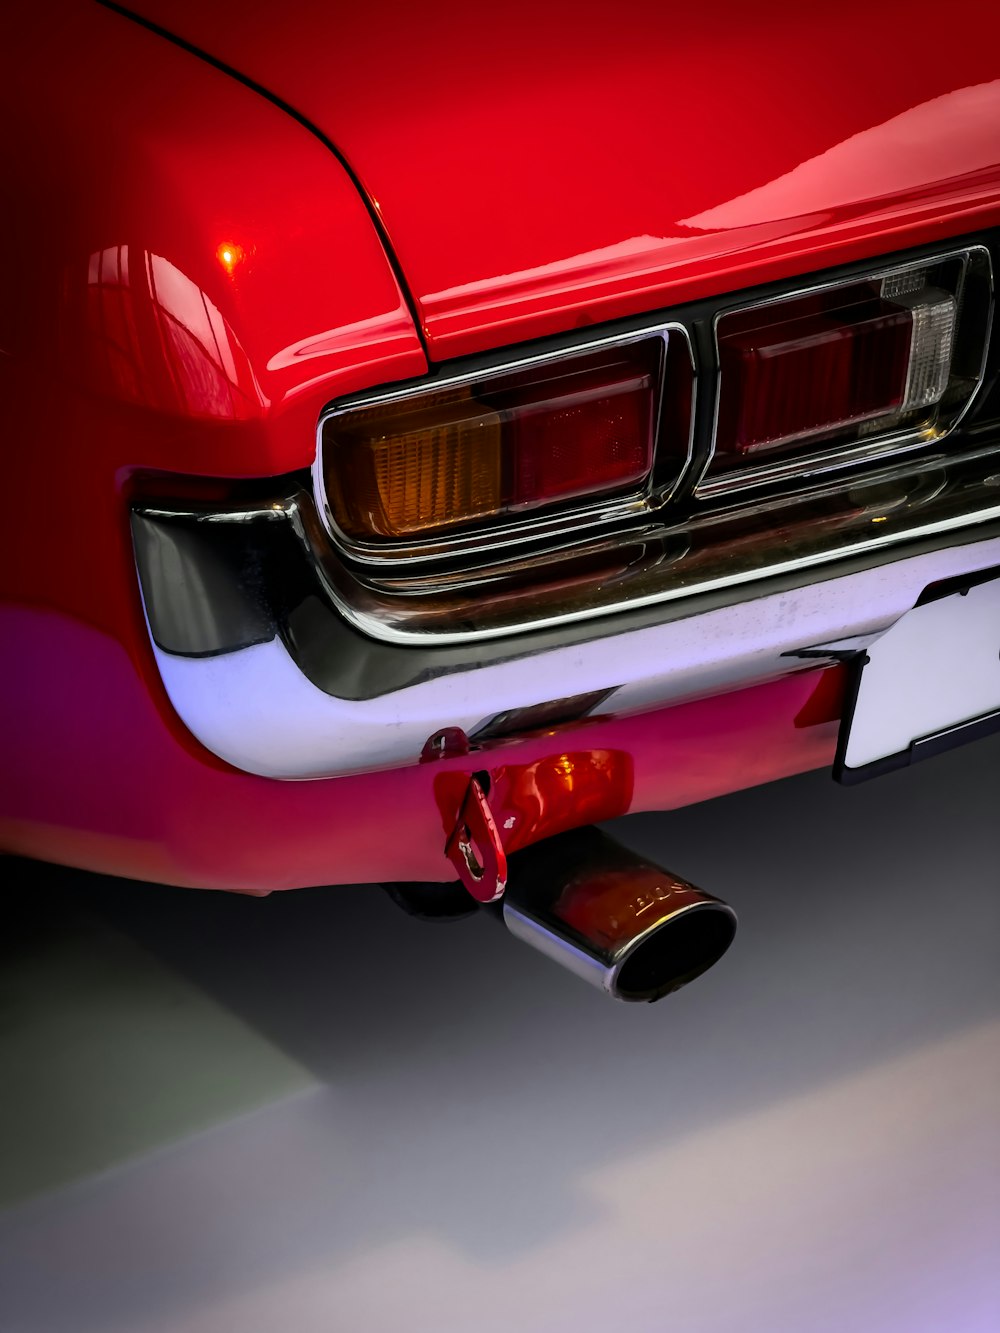 a close up of a red car with a exhaust pipe